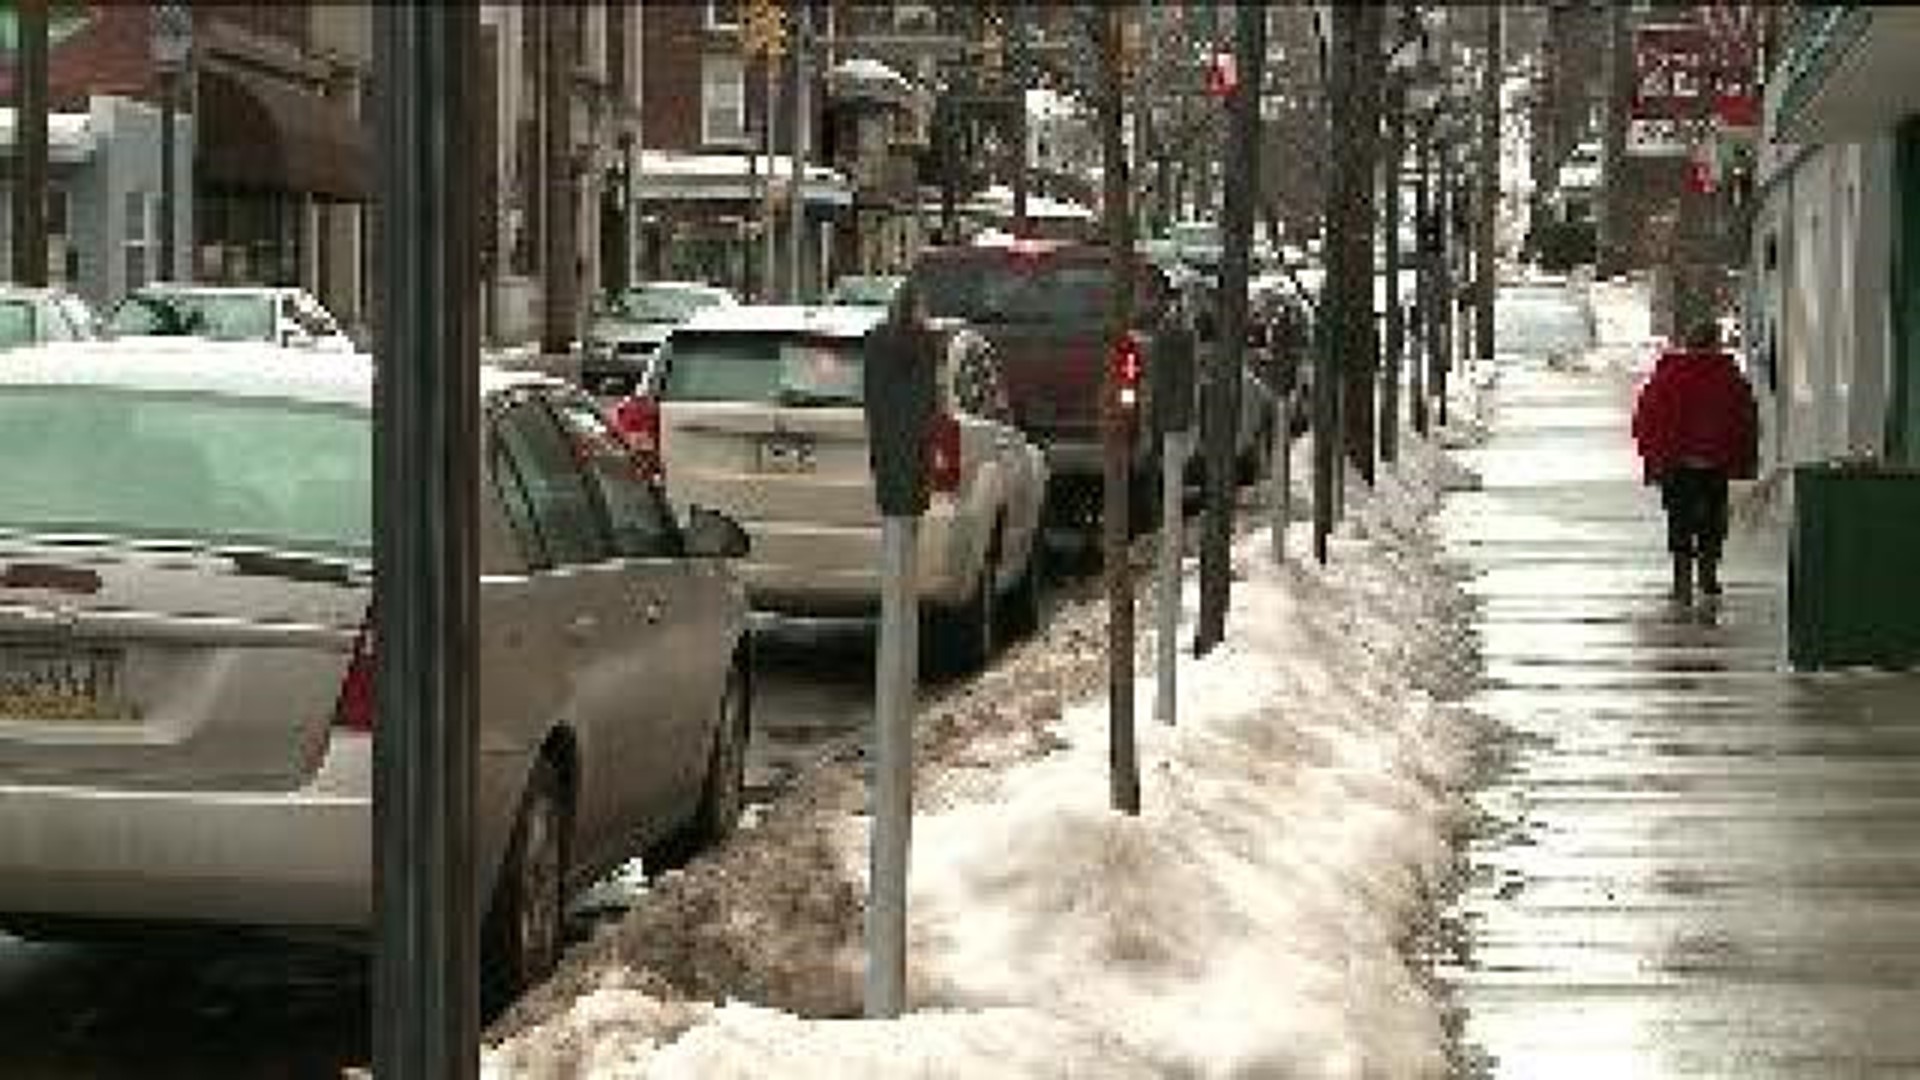 Free Parking for Snow Removal in Carbondale